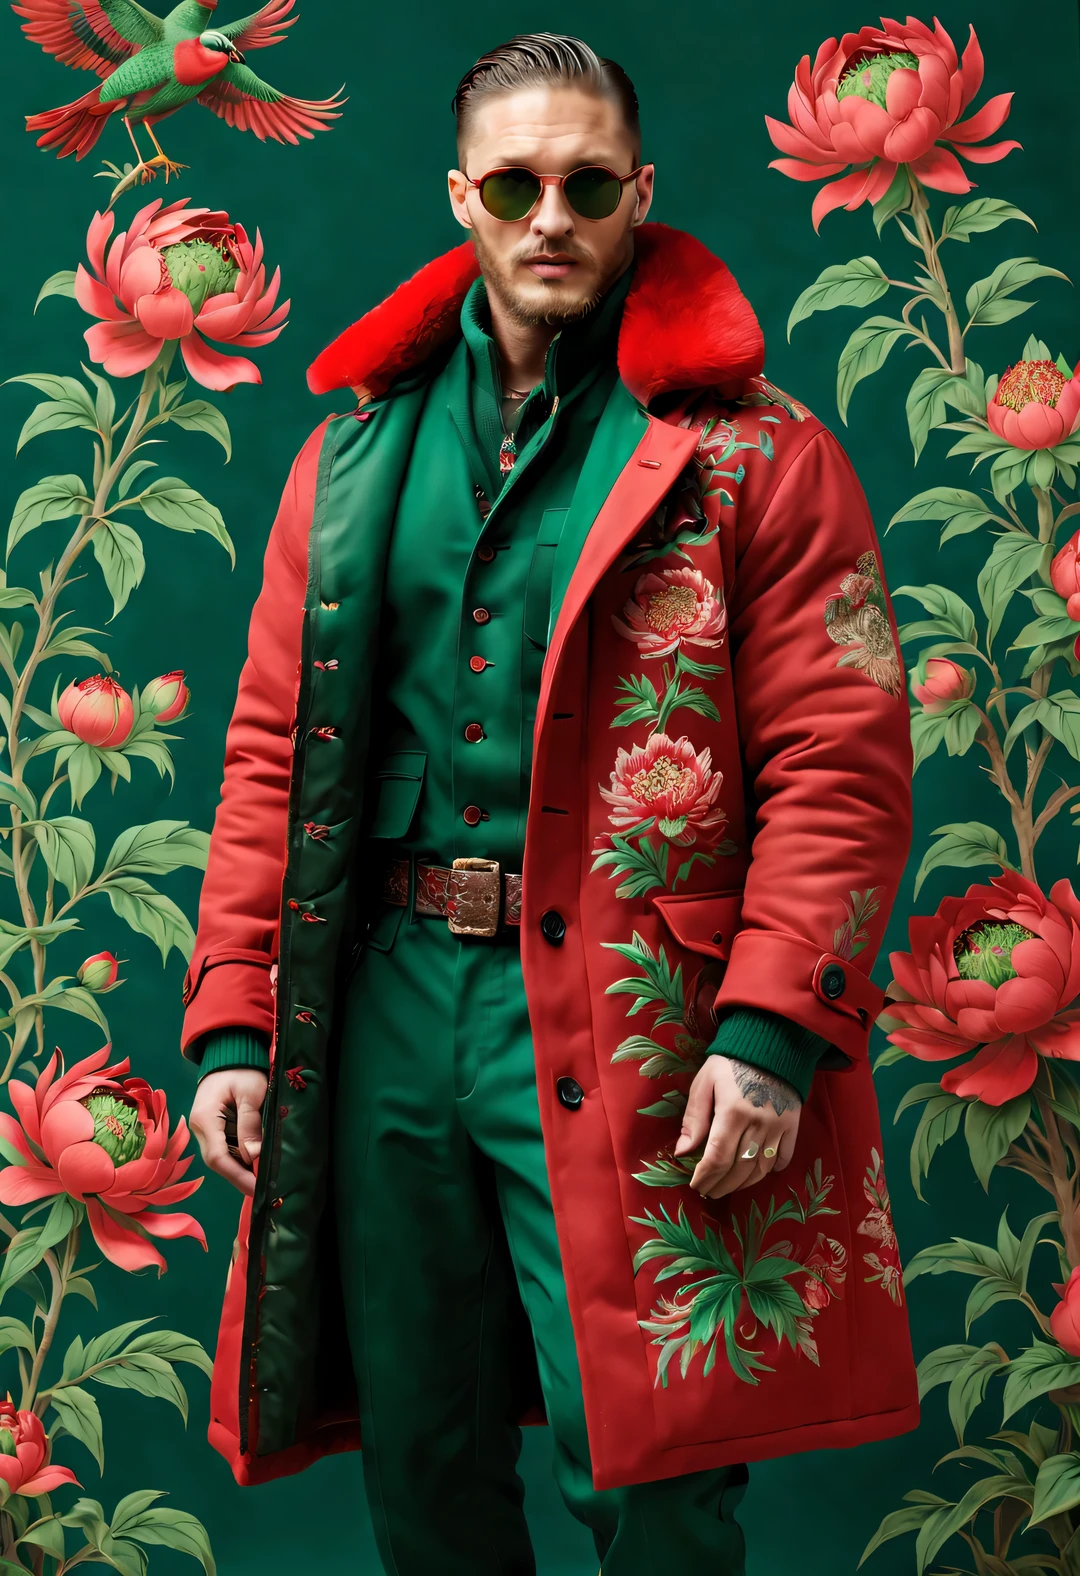 Winter men&#39;s fashion show, (whole body),
(Men's winter exceedsized cotton coat design: 1.0), (Tall and handsome male model Tom Hardy wears a cotton coat made of thick red and green peony fabric: 1.34), Suzhou embroidery large red and green peonies flying birds, The theme of interweaving patterns, With brown fur collar and intricate pattern, A modern interpretation of Tibetan peony and bird totems, Learn from the rich cultural heritage and exquisite craftsmanship of the Northeast region, It reinterprets traditional clothing with modern charm,
Parka snow coat, (exceed) coat, sweater, winter scarf warm scarf, gloves gloves, belt, boots, sunglasses, Wearing a thick cotton coat，red and green peonies,
background blur, Like a movie, With exceptionally clear details, Accent lighting, global illumination, intricate details, Realism, close-up, film camera,